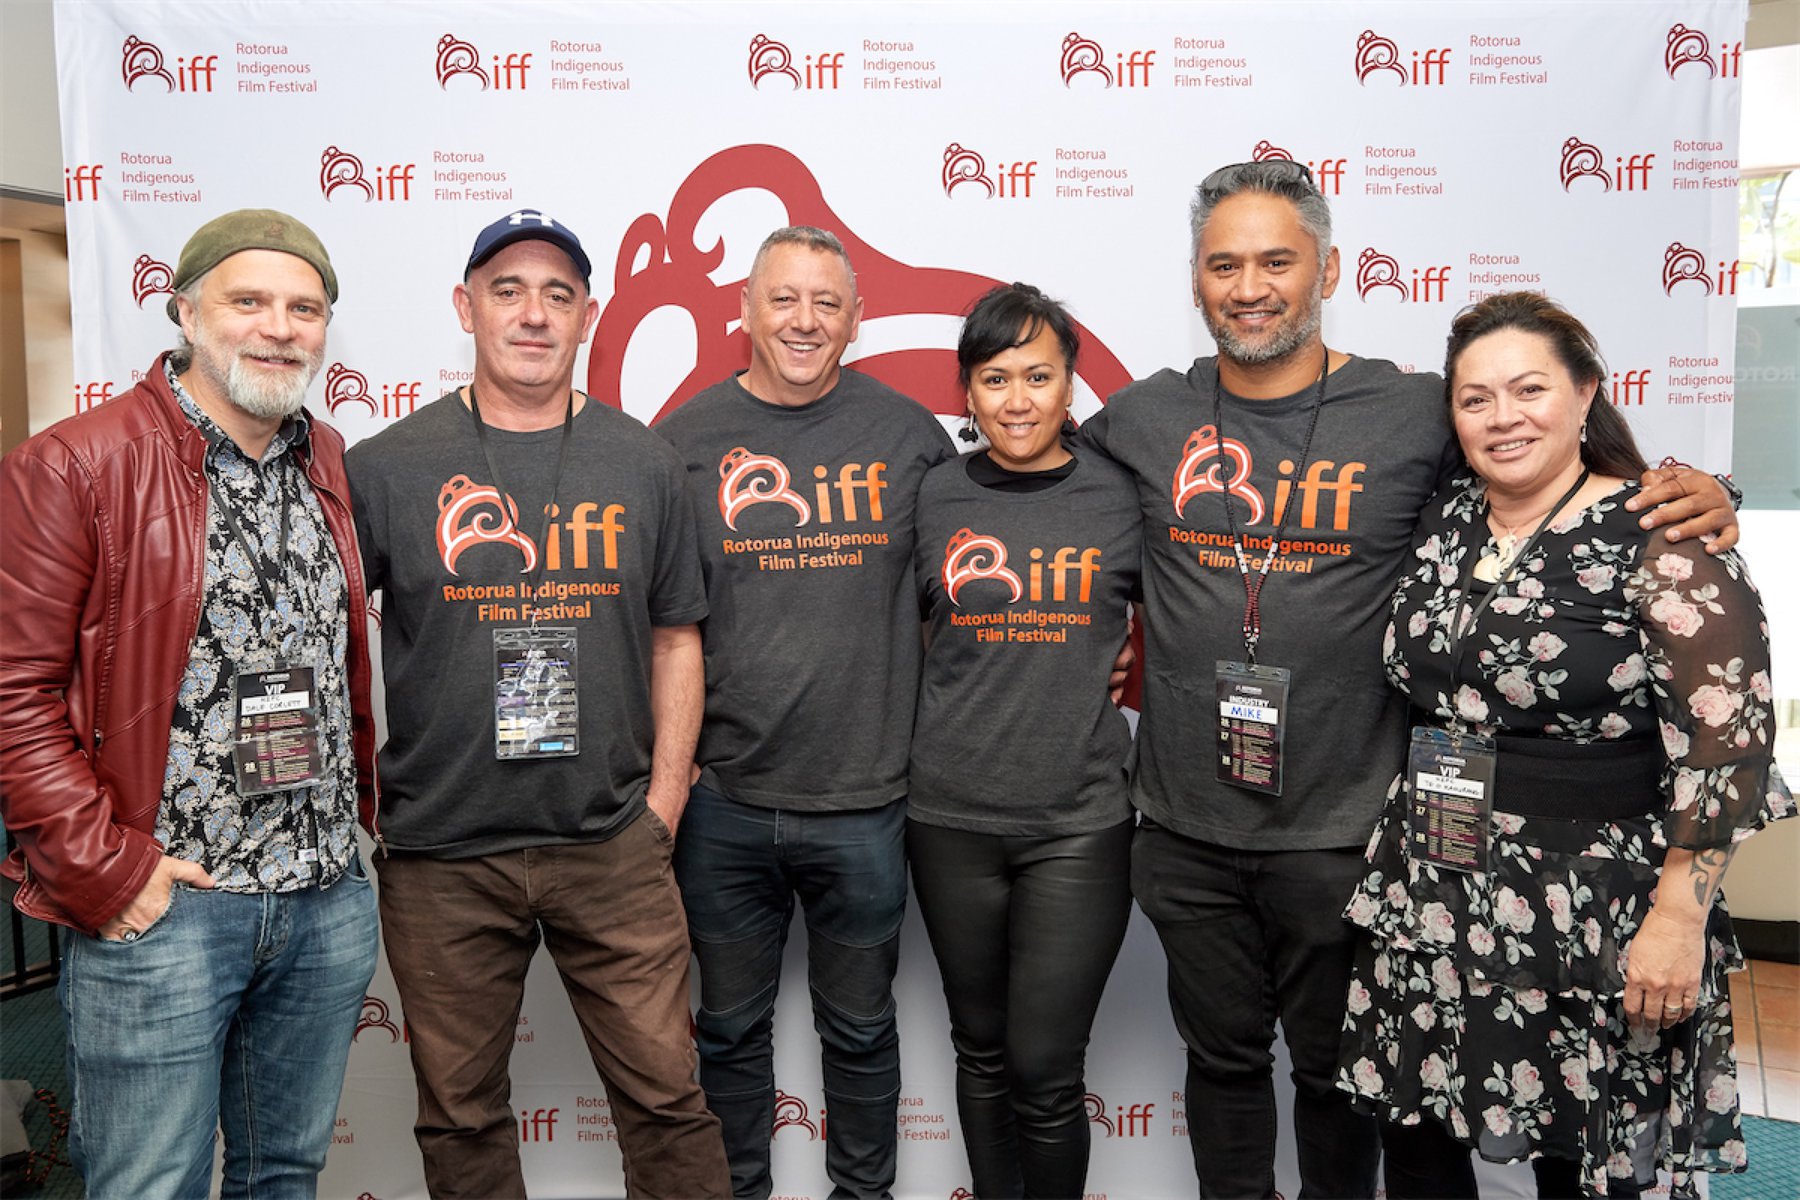 Rotorua Indigenous Film Festival offers a rare opportunity for filmmakers